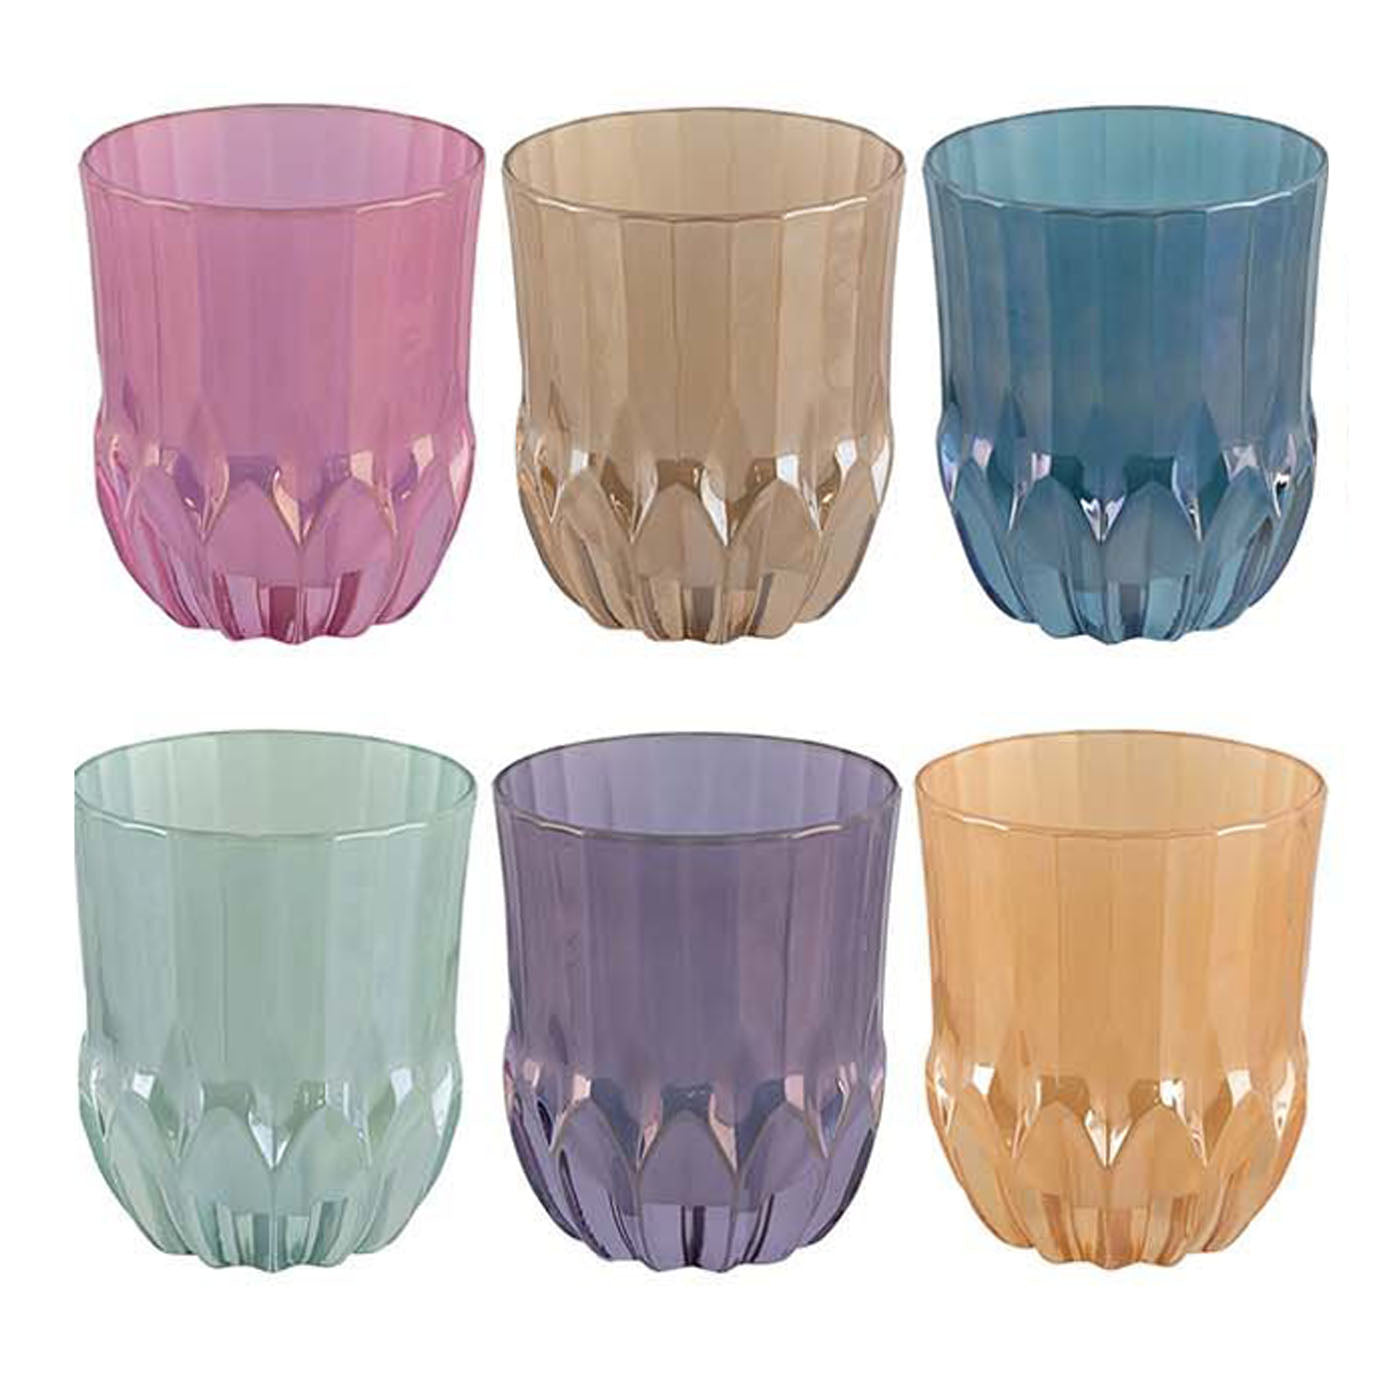 Canal Set of 6 Low Water Glasses - Main view